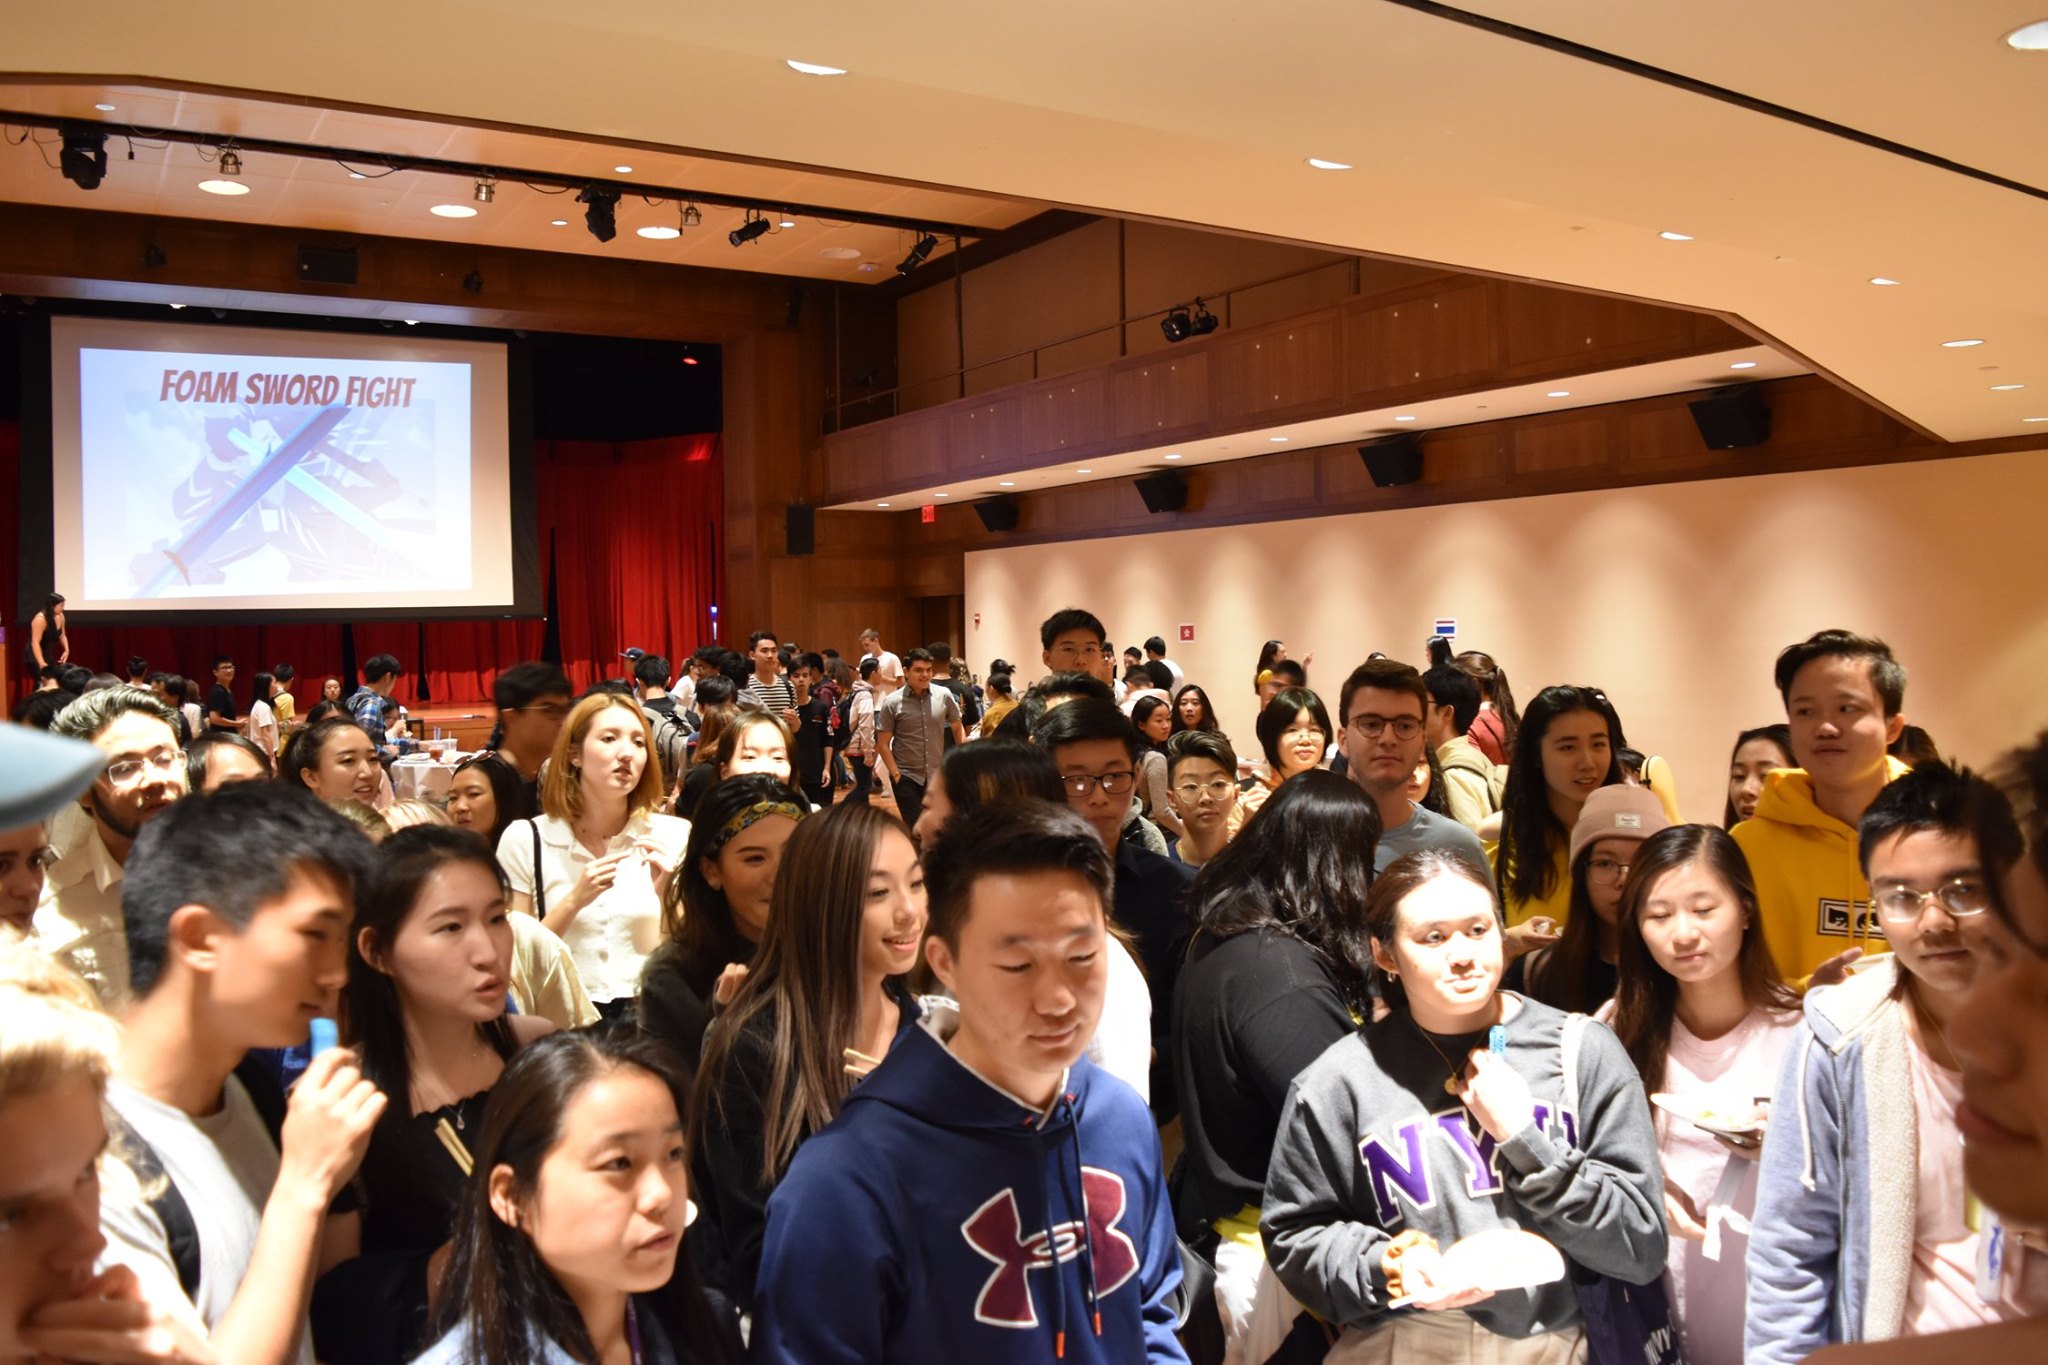 A large group of students socializing in a packed auditorium.